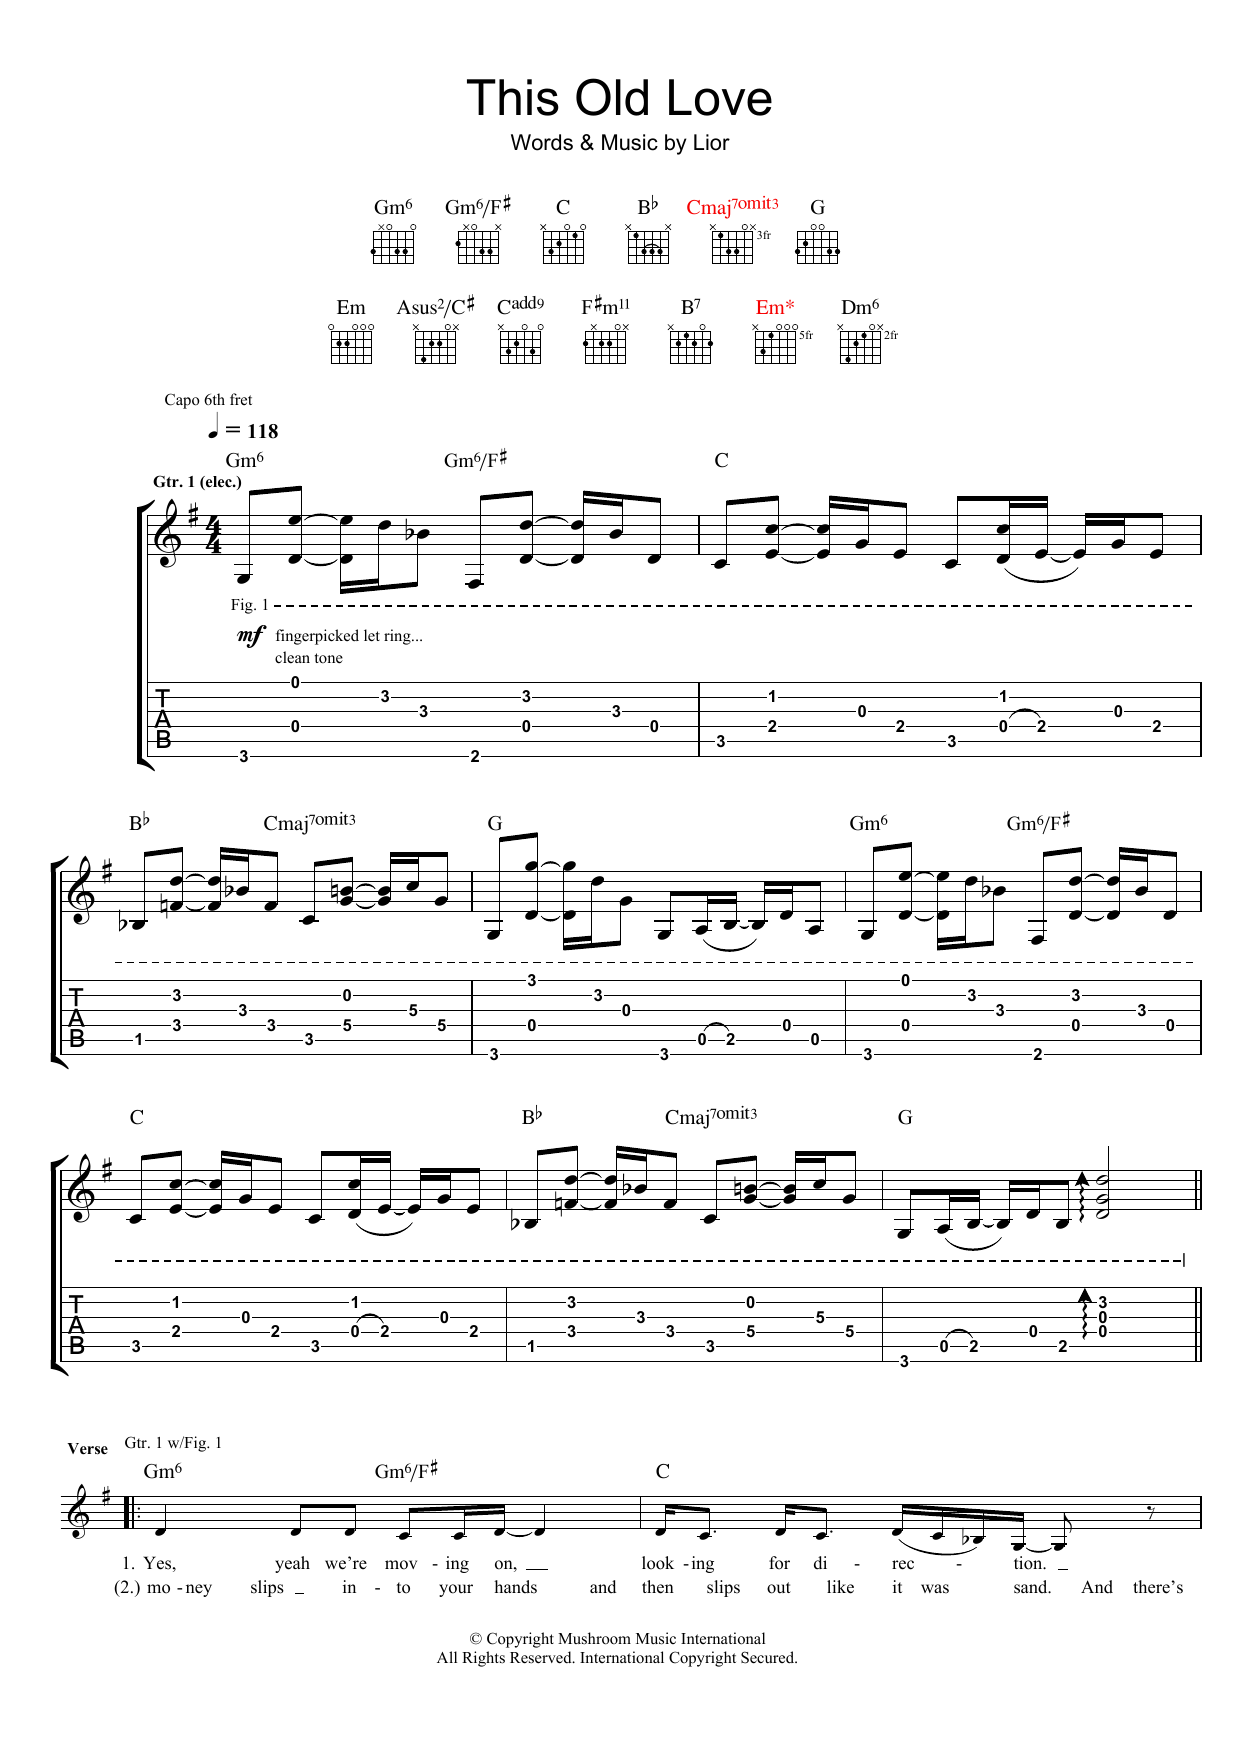 Download Lior This Old Love Sheet Music